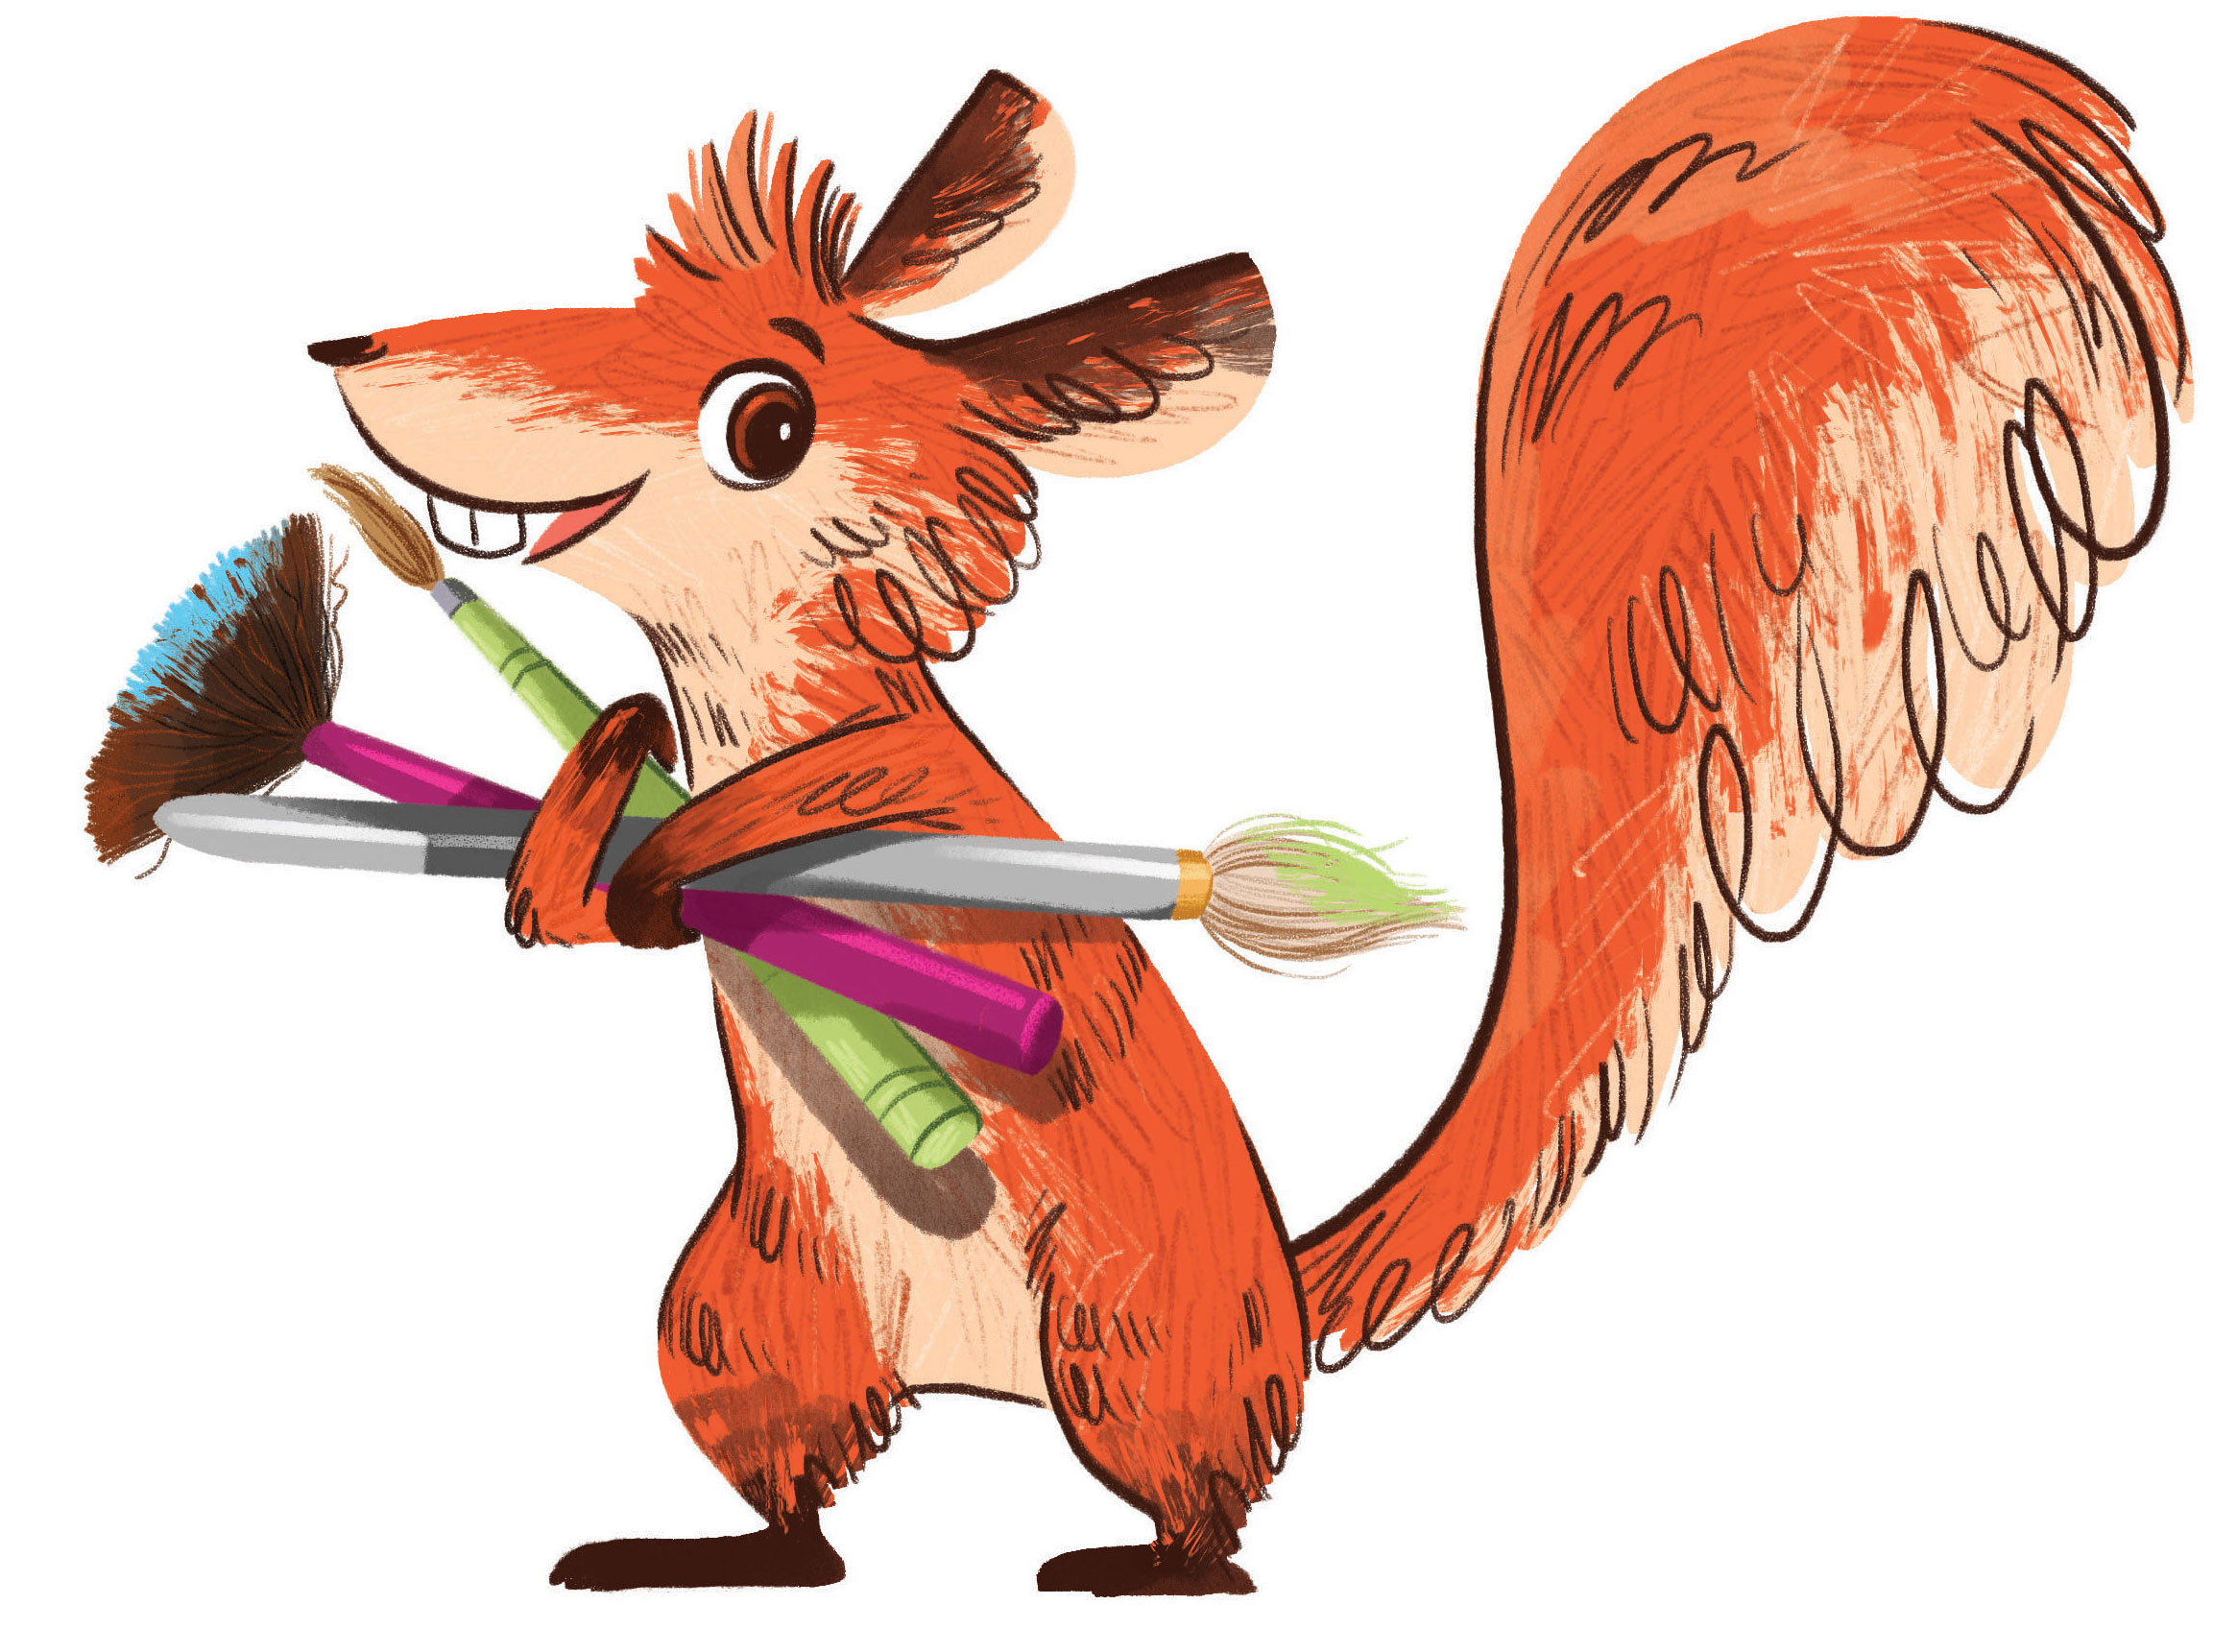 Tails the squirrel with paintbrushes and crayons